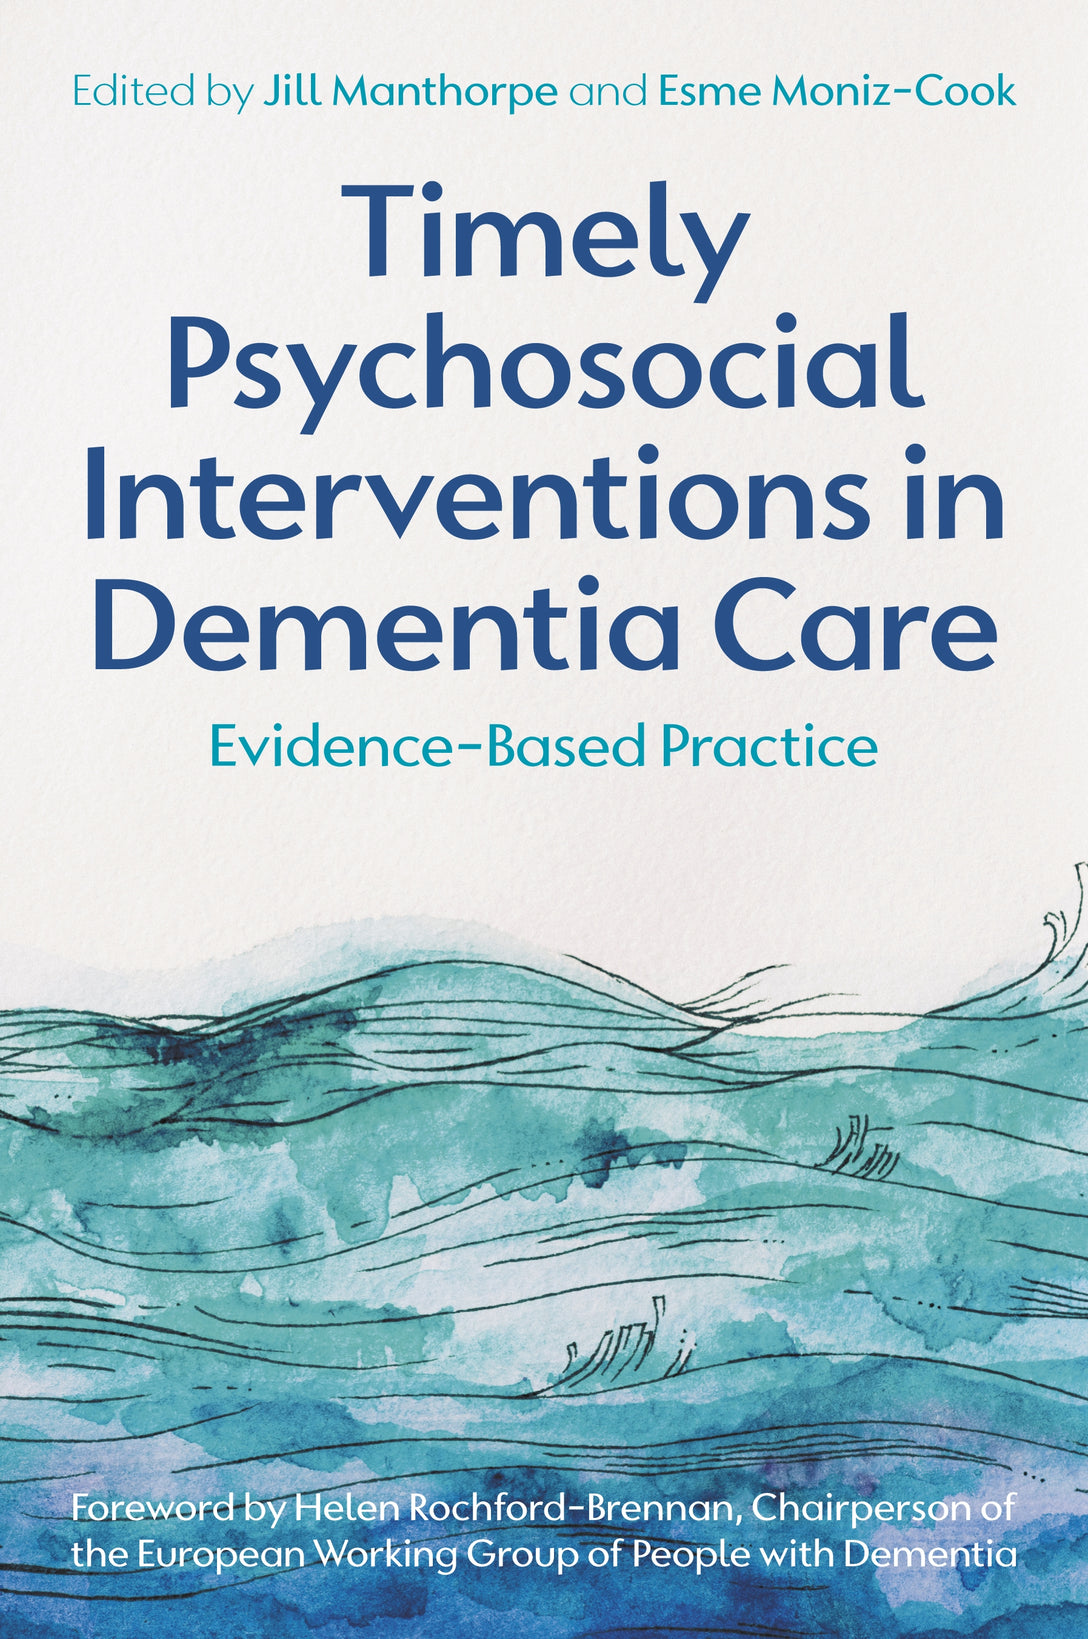 Timely Psychosocial Interventions in Dementia Care by Jill Manthorpe, Esme Moniz-Cook, Helen Rochford-Brennan, No Author Listed